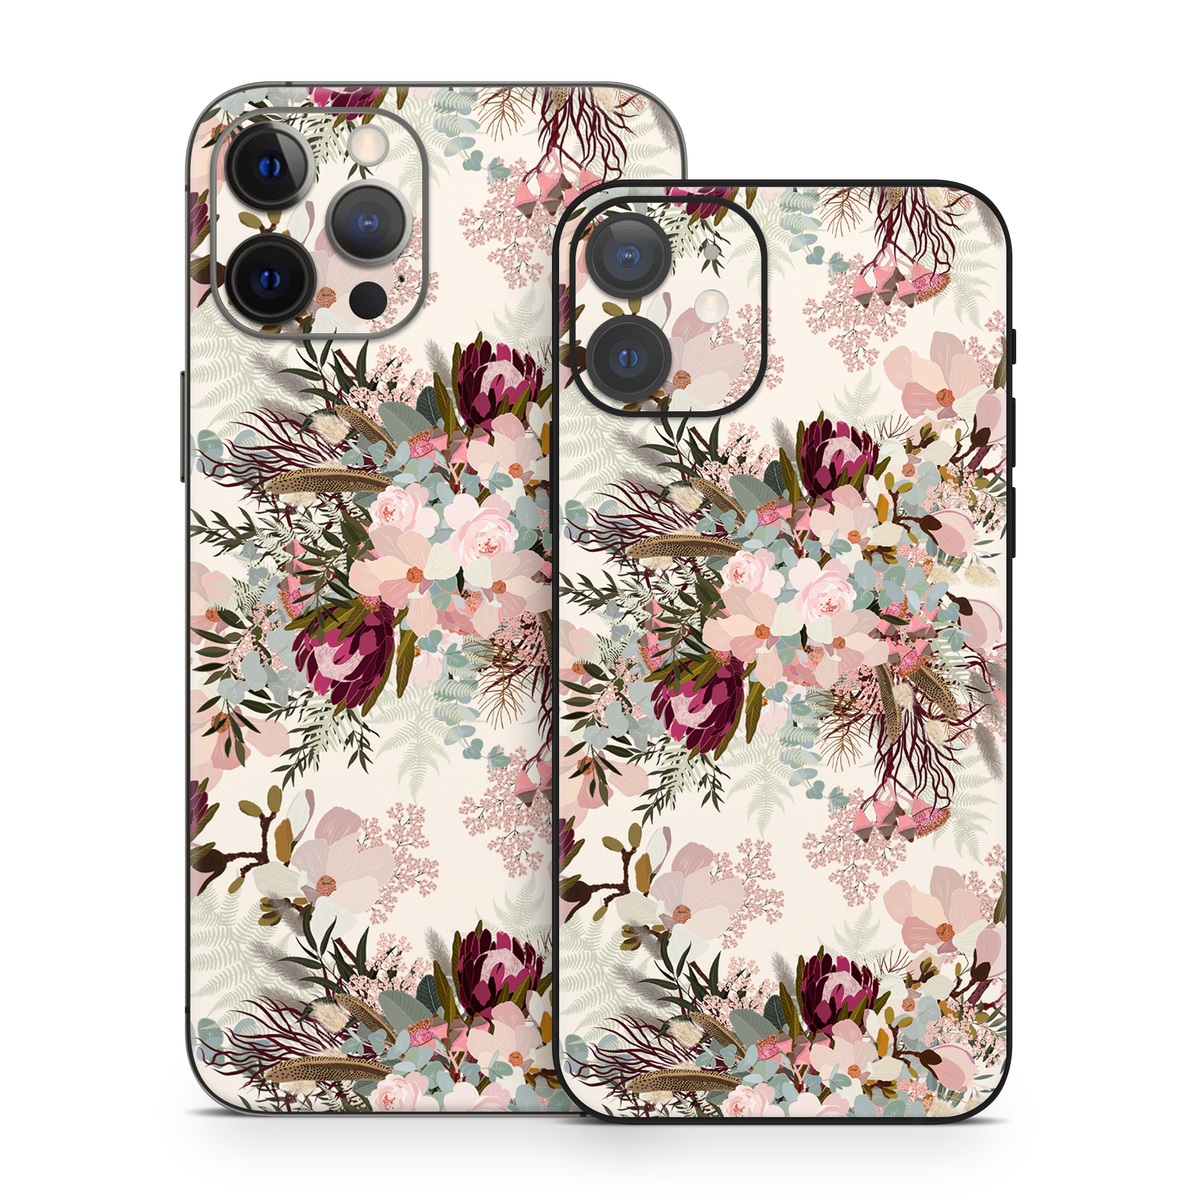 iPhone 12 Series Skin design of Pink, Pattern, Lilac, Flower, Plant, Petal, Floral design, Textile, Design, Blossom, with white, red, pink, blue, brown colors